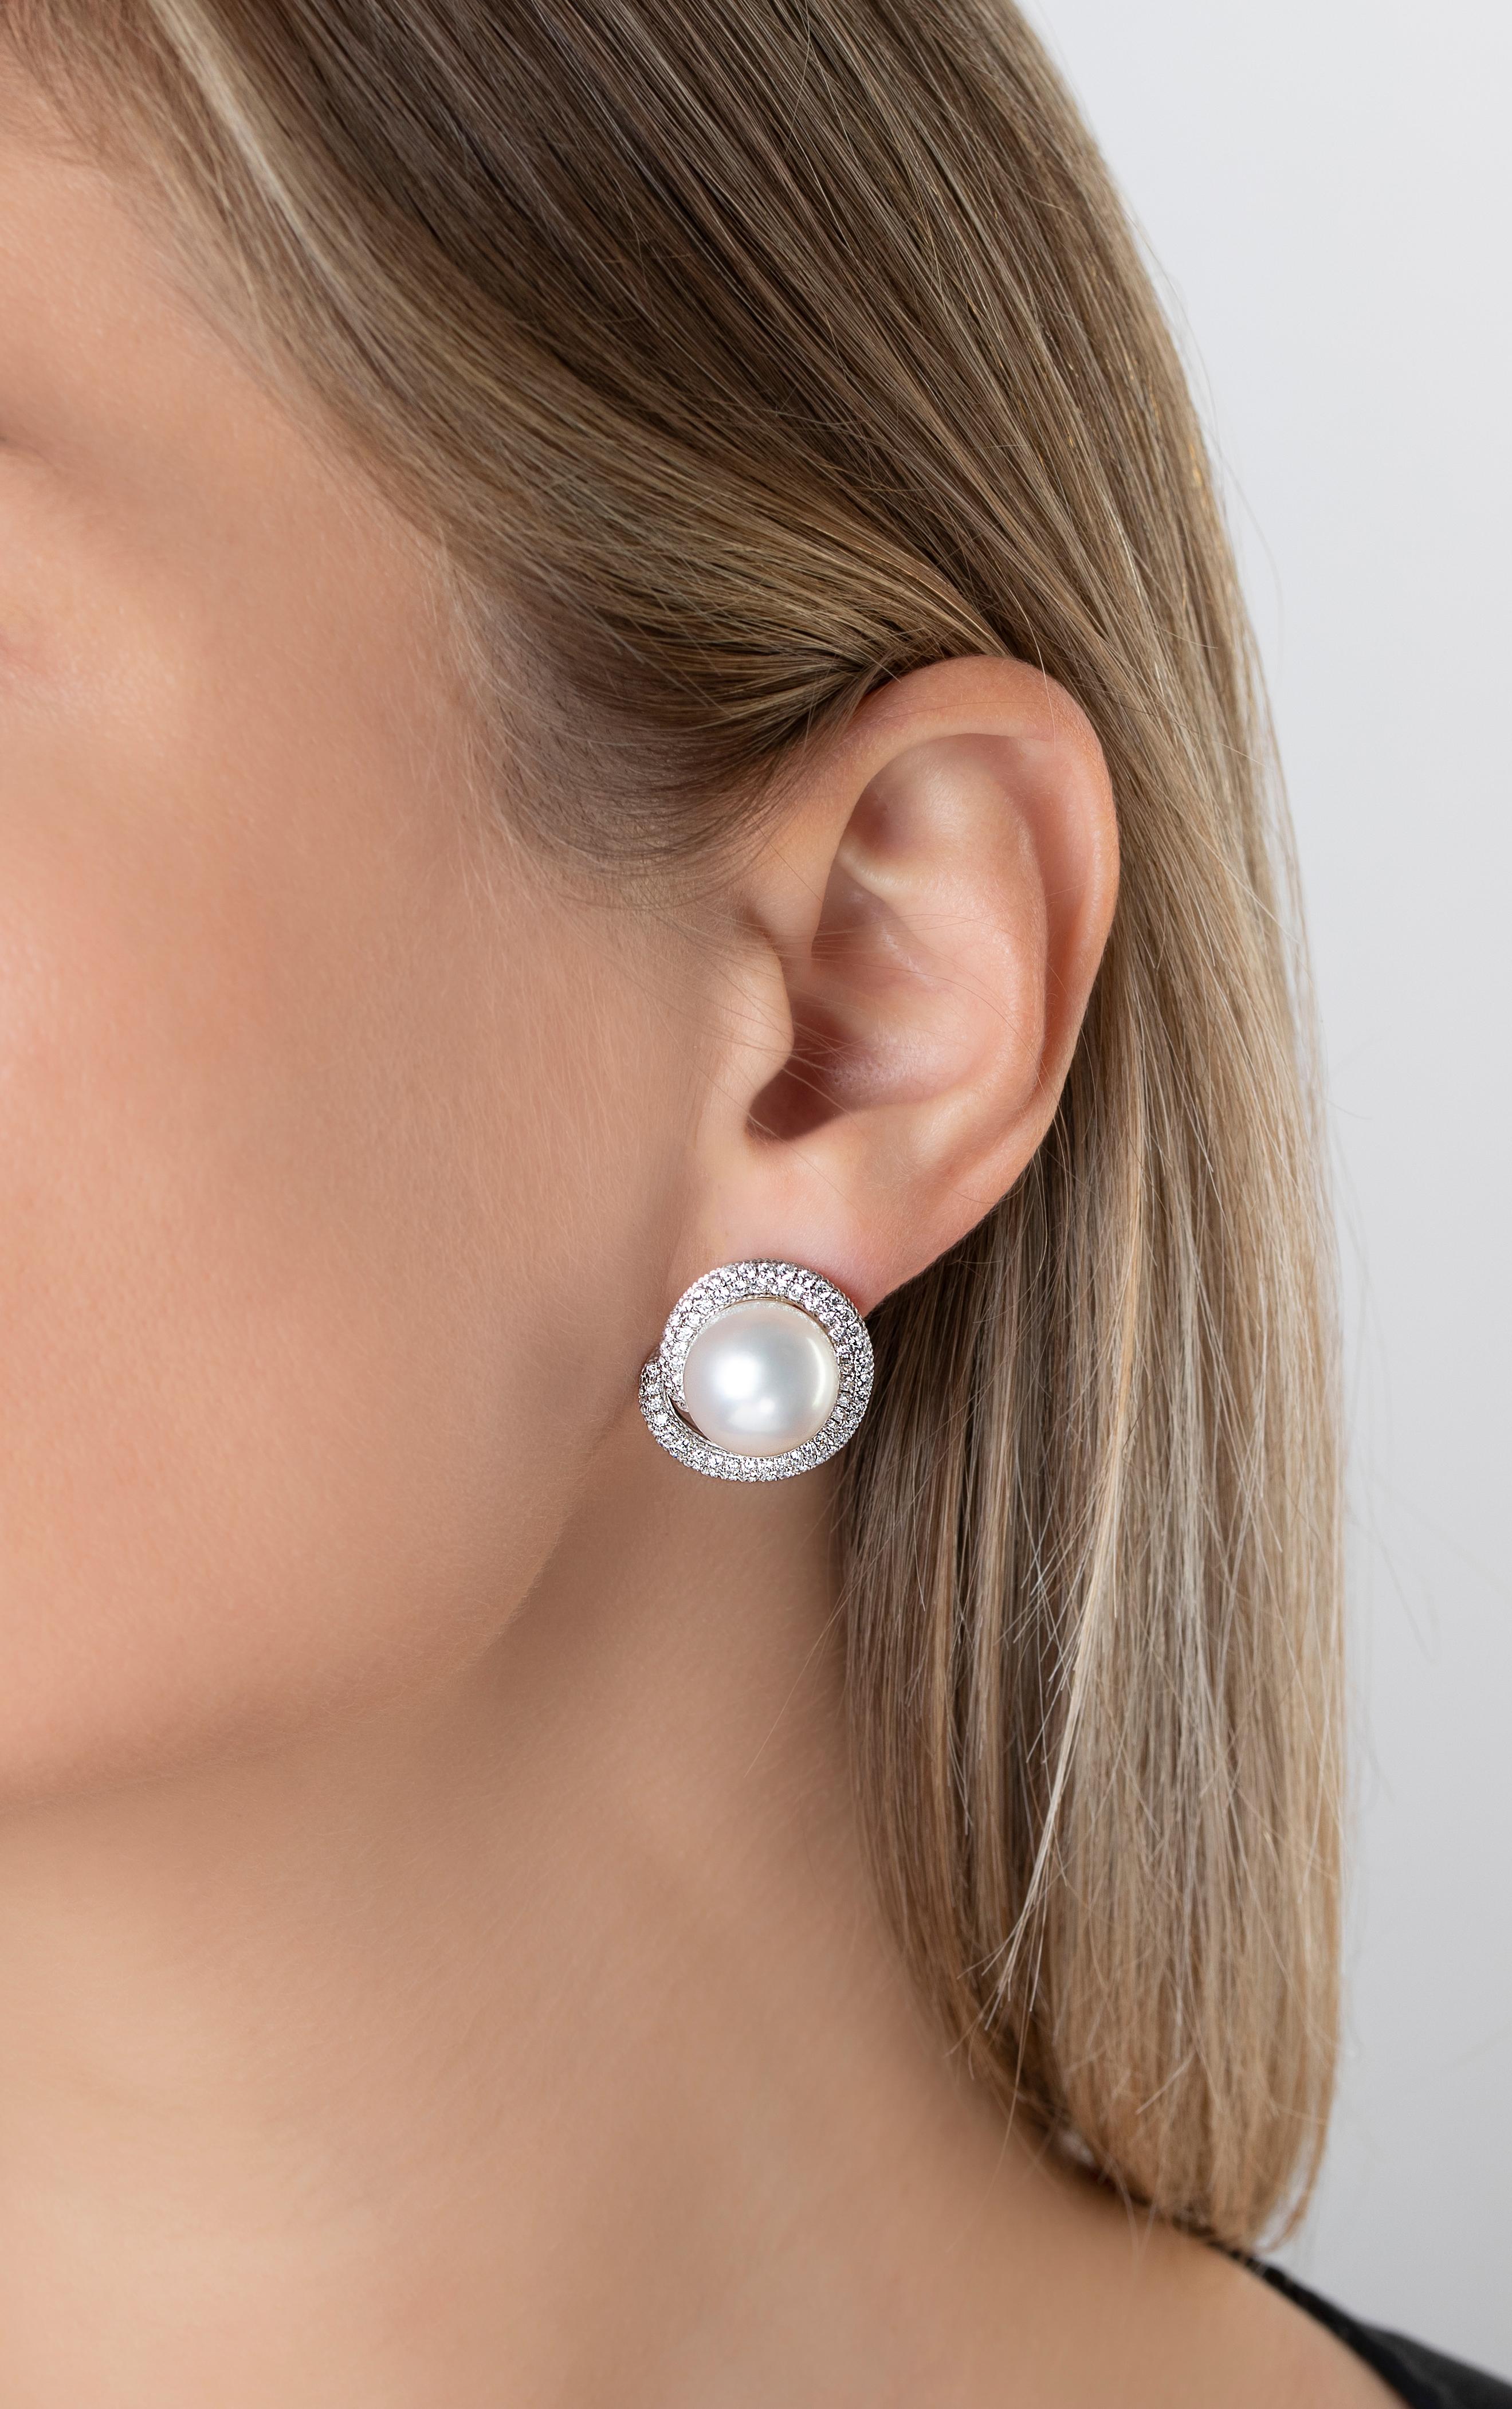 The Mayfair collection by Yoko London features showstoping pieces, as exclusive as the collection's namesake district. These statement earrings feature two lustrous South Sea Pearls set among a bold twist of diamonds. Sure to make an impression,